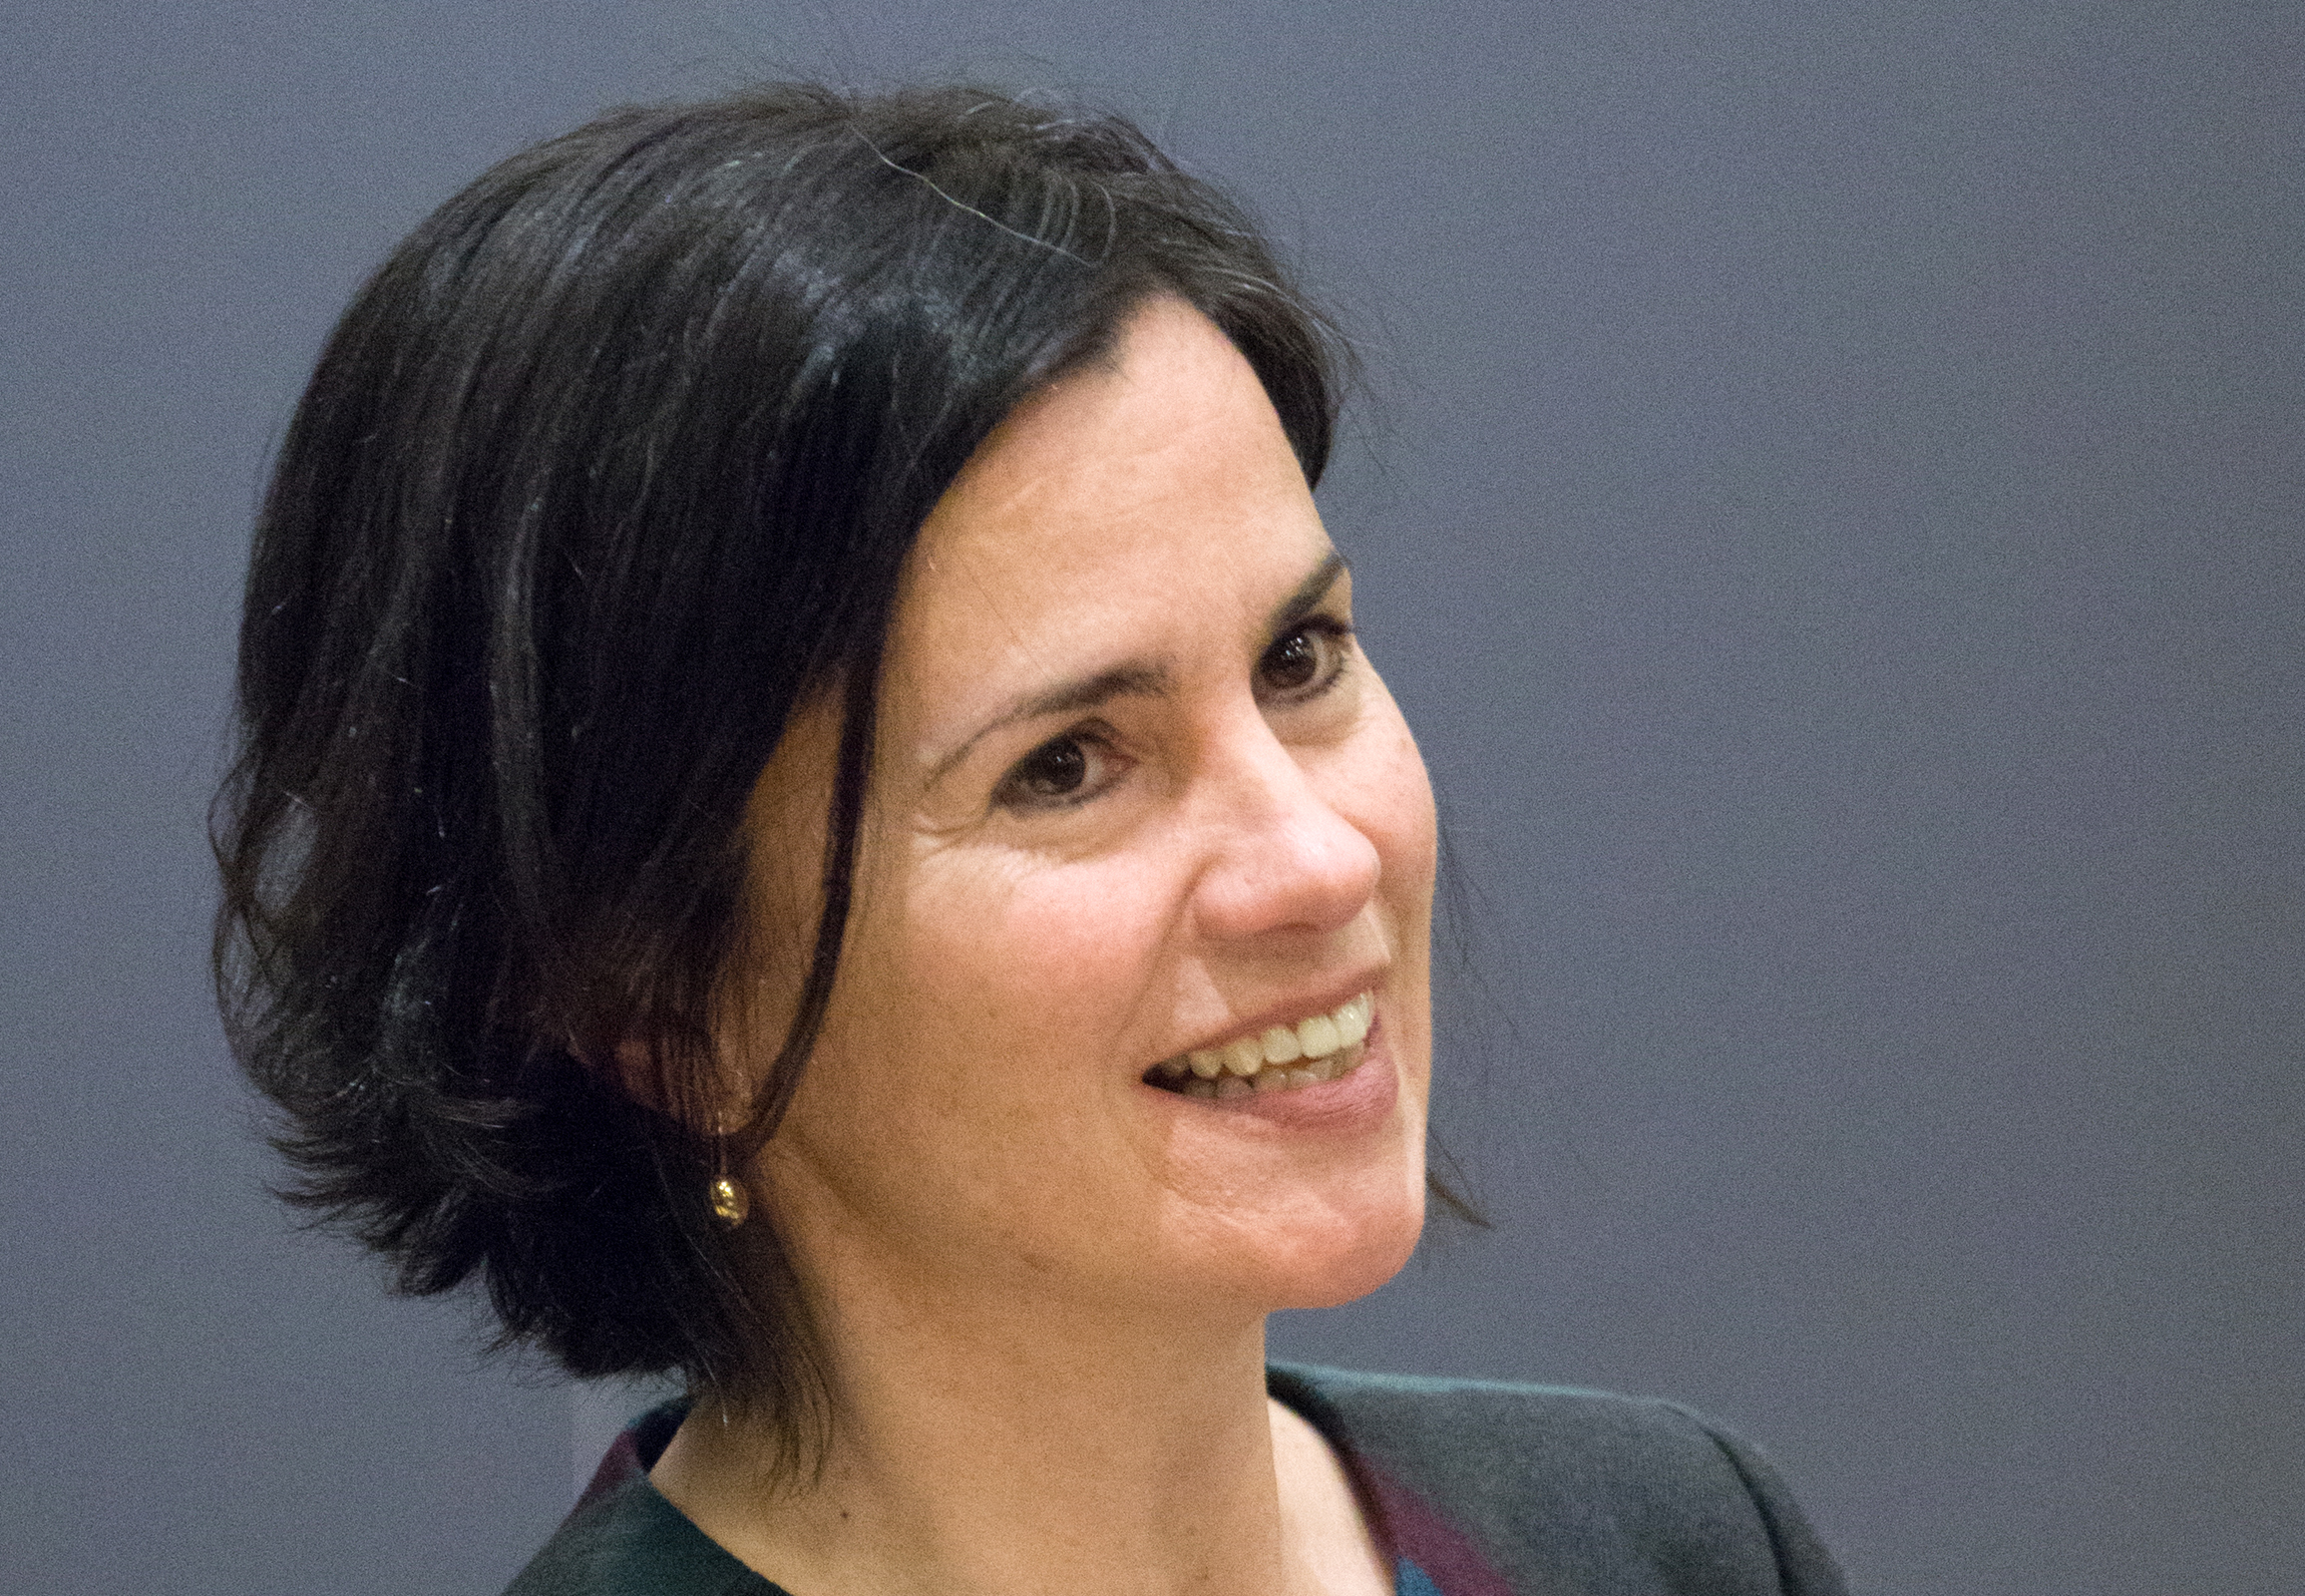 A white woman with short dark hair is smiling and looking off to the side of the camera.